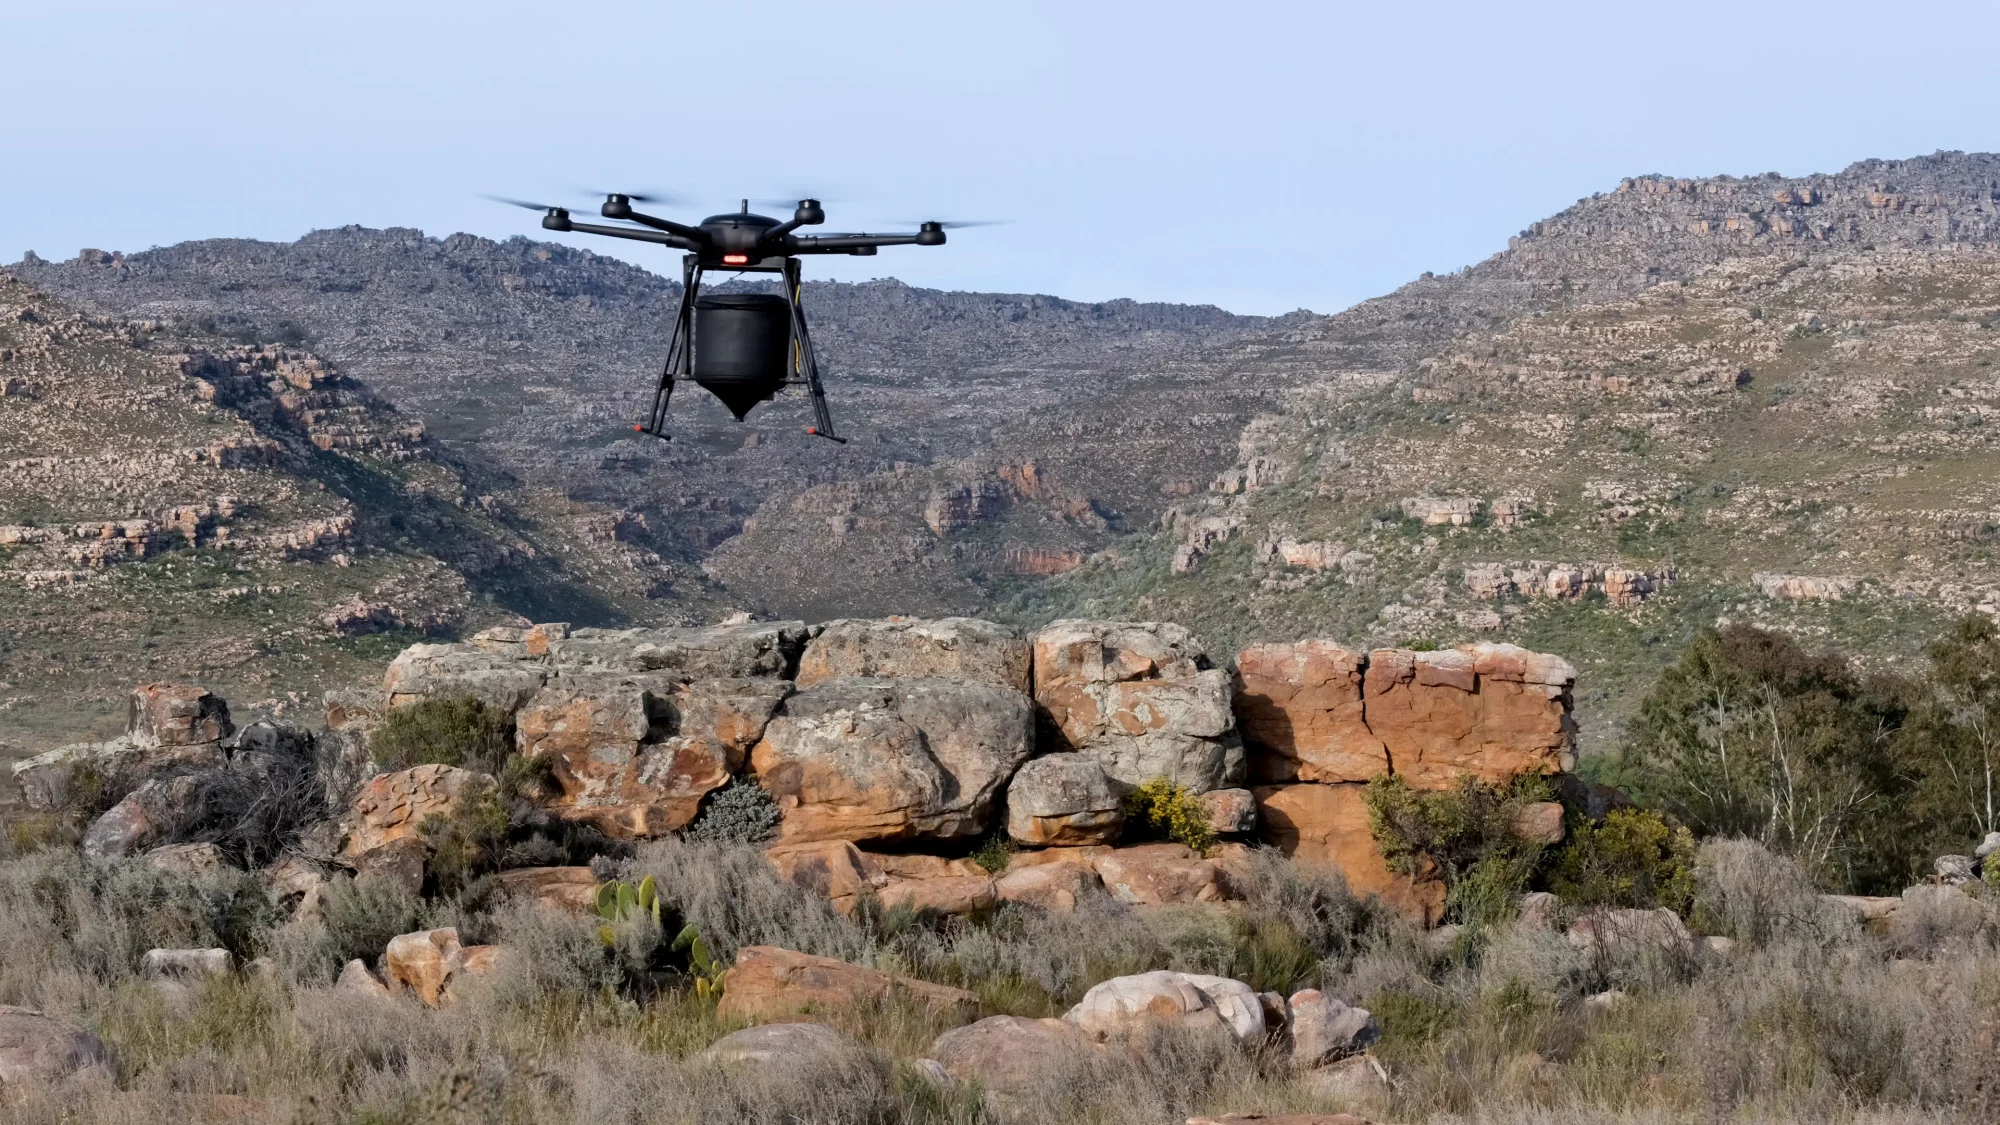 An AirSeed drone flying over rugged terrain. (AirSeed)